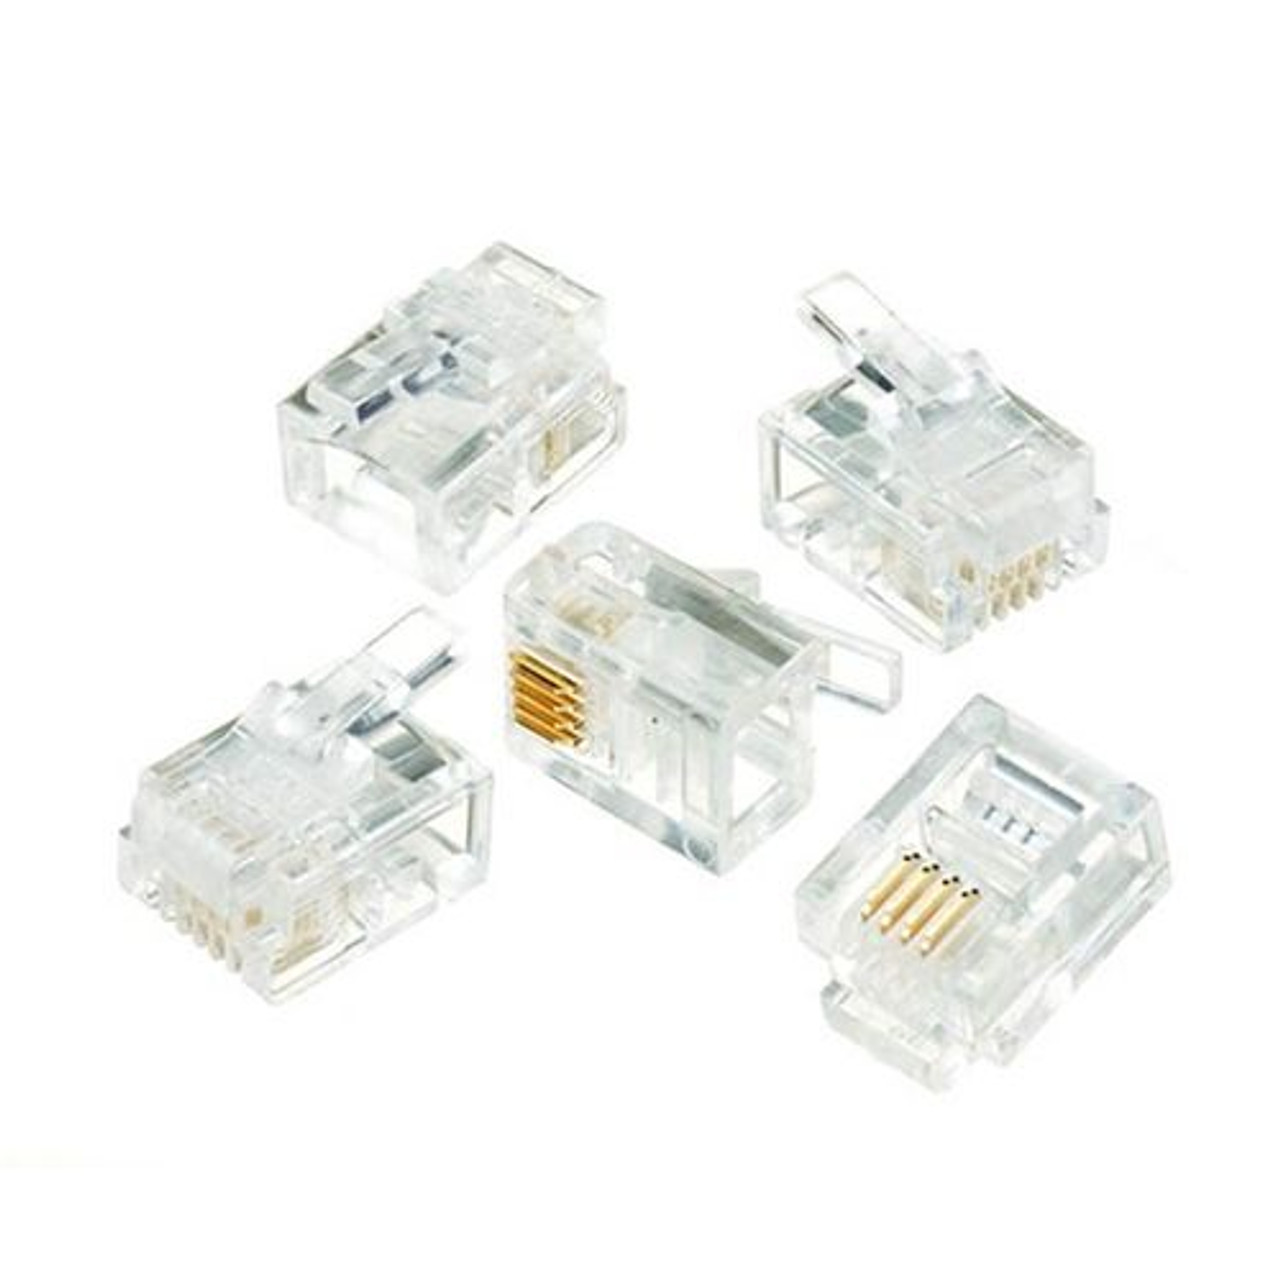 Eagle RJ11 Modular Plug Connector 10 Pack 6P4C 4 Conductor Flat Stranded 24 26 AWG Gold